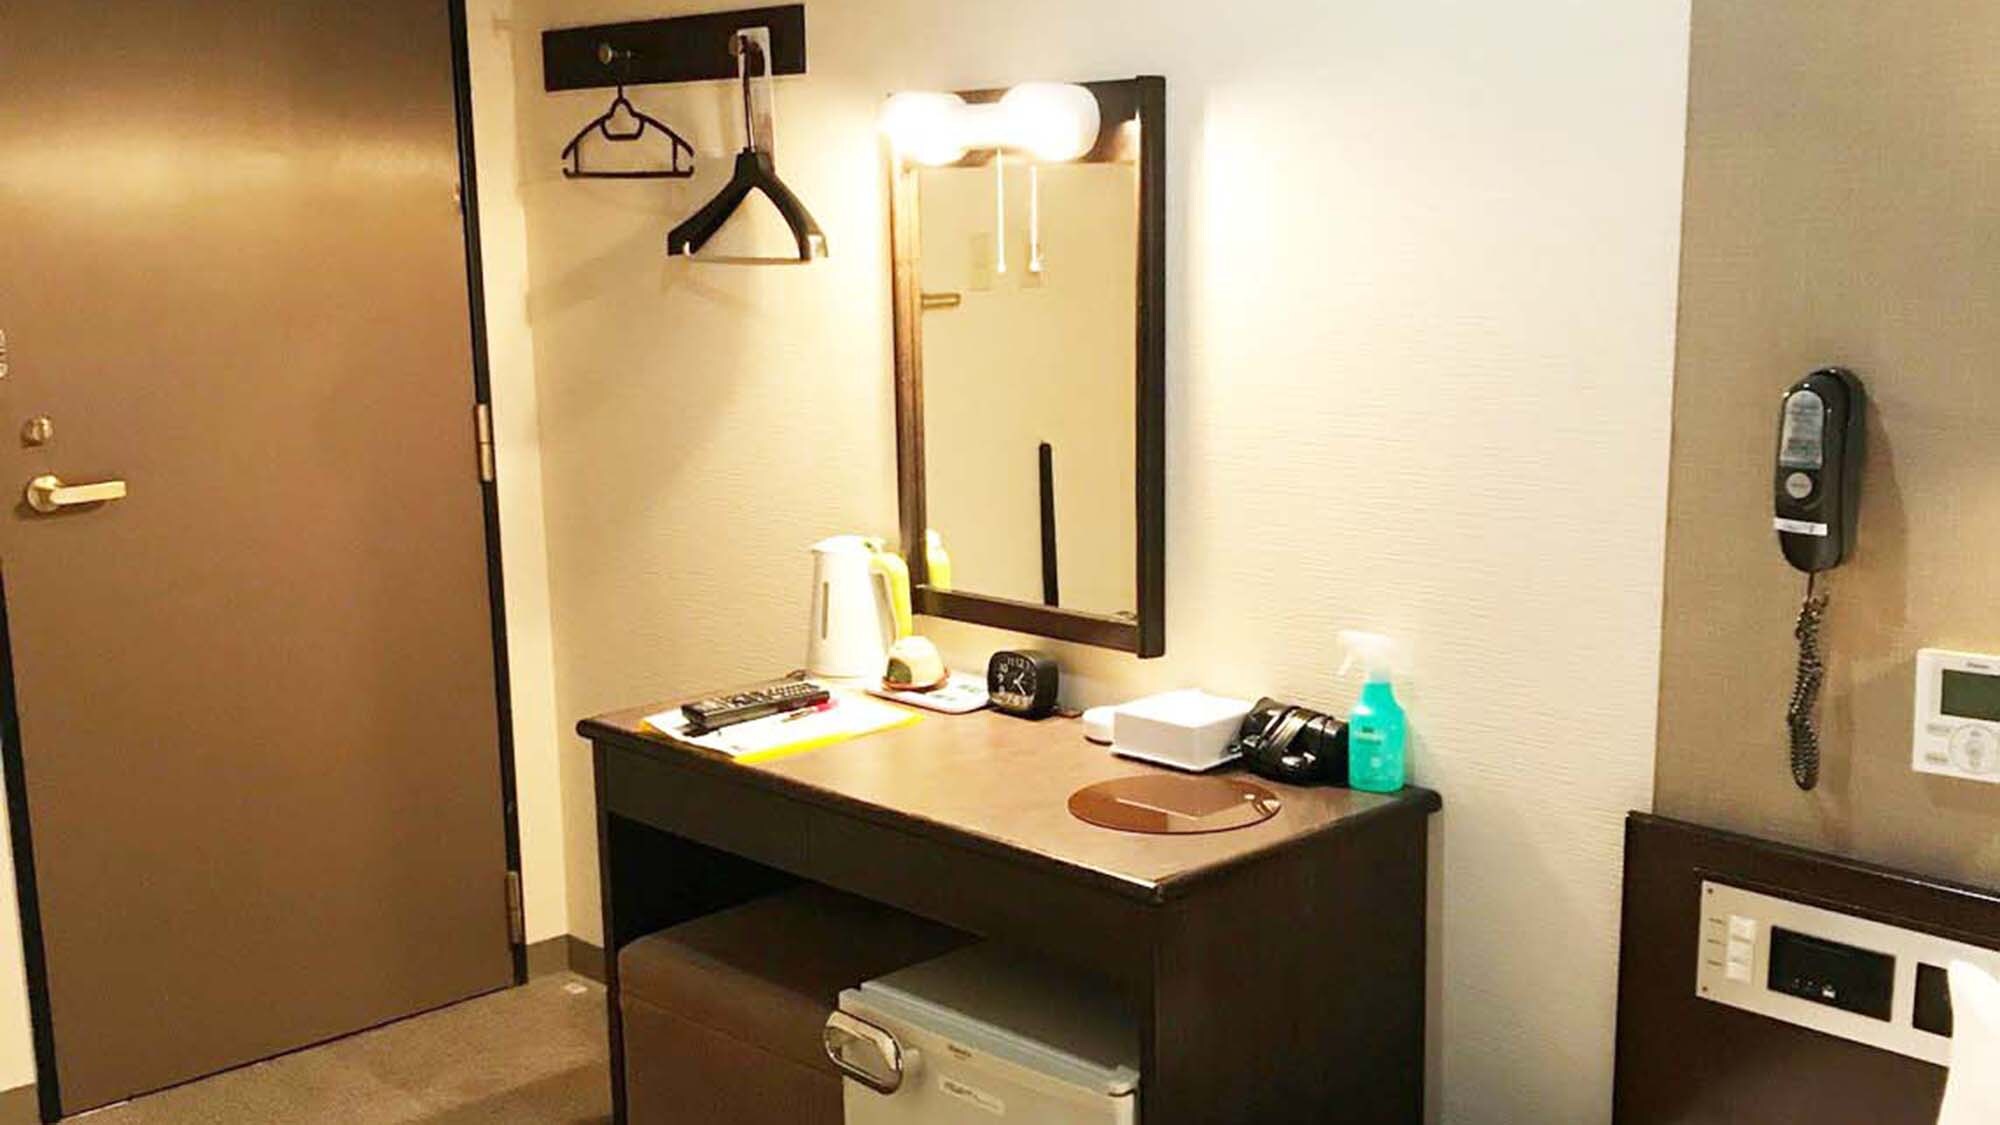 ・ [One example of a single room] Equipped with equipment and amenities necessary for your stay